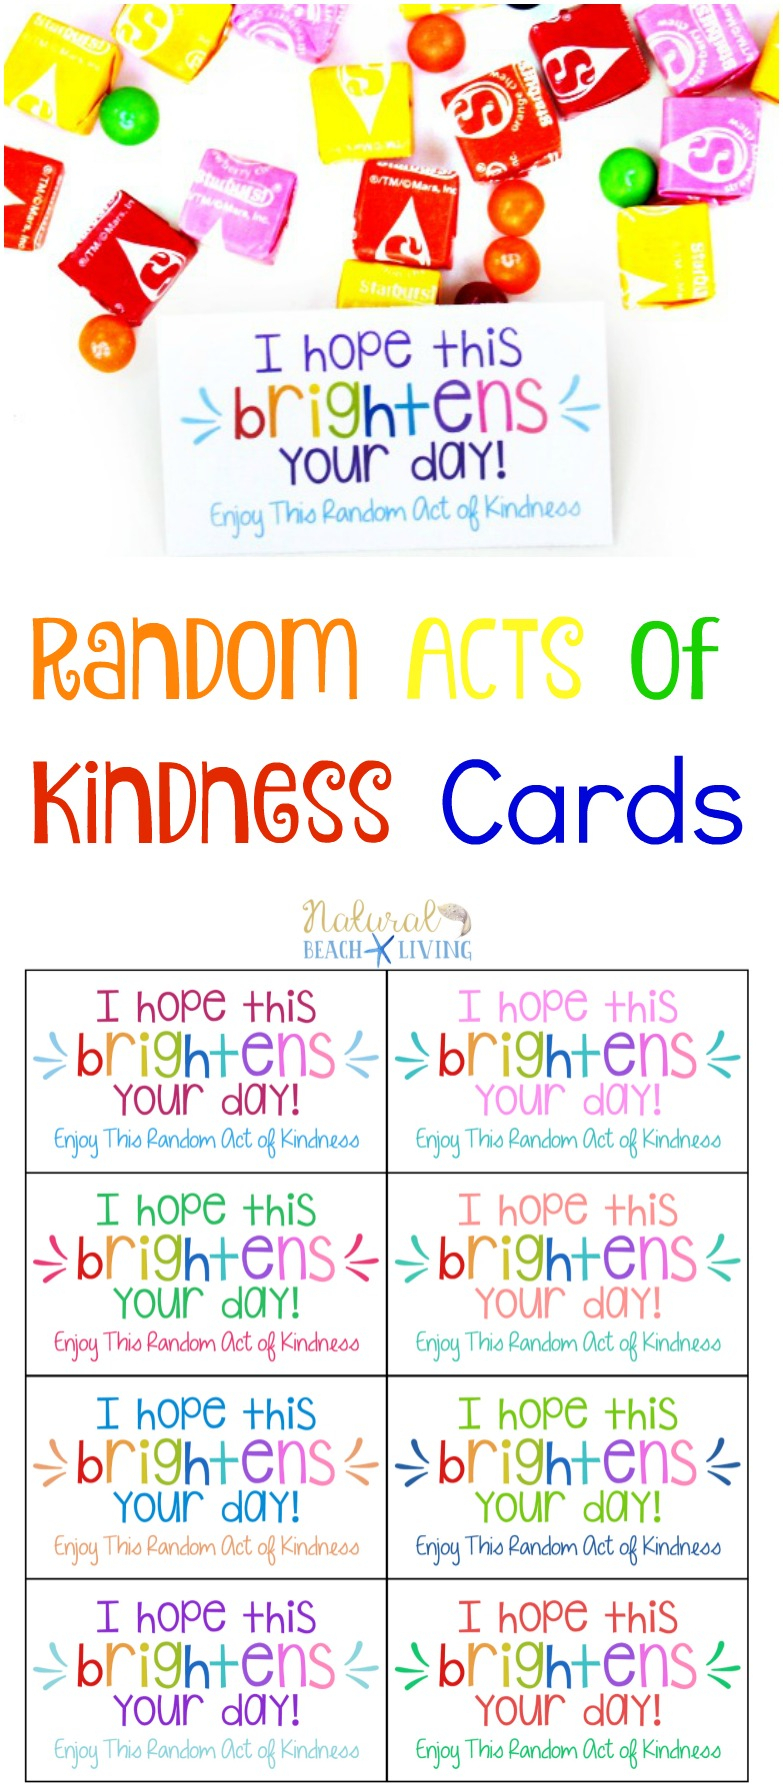 The Best Random Acts Of Kindness Printable Cards Free Pertaining To Random Acts Of Kindness Cards Templates